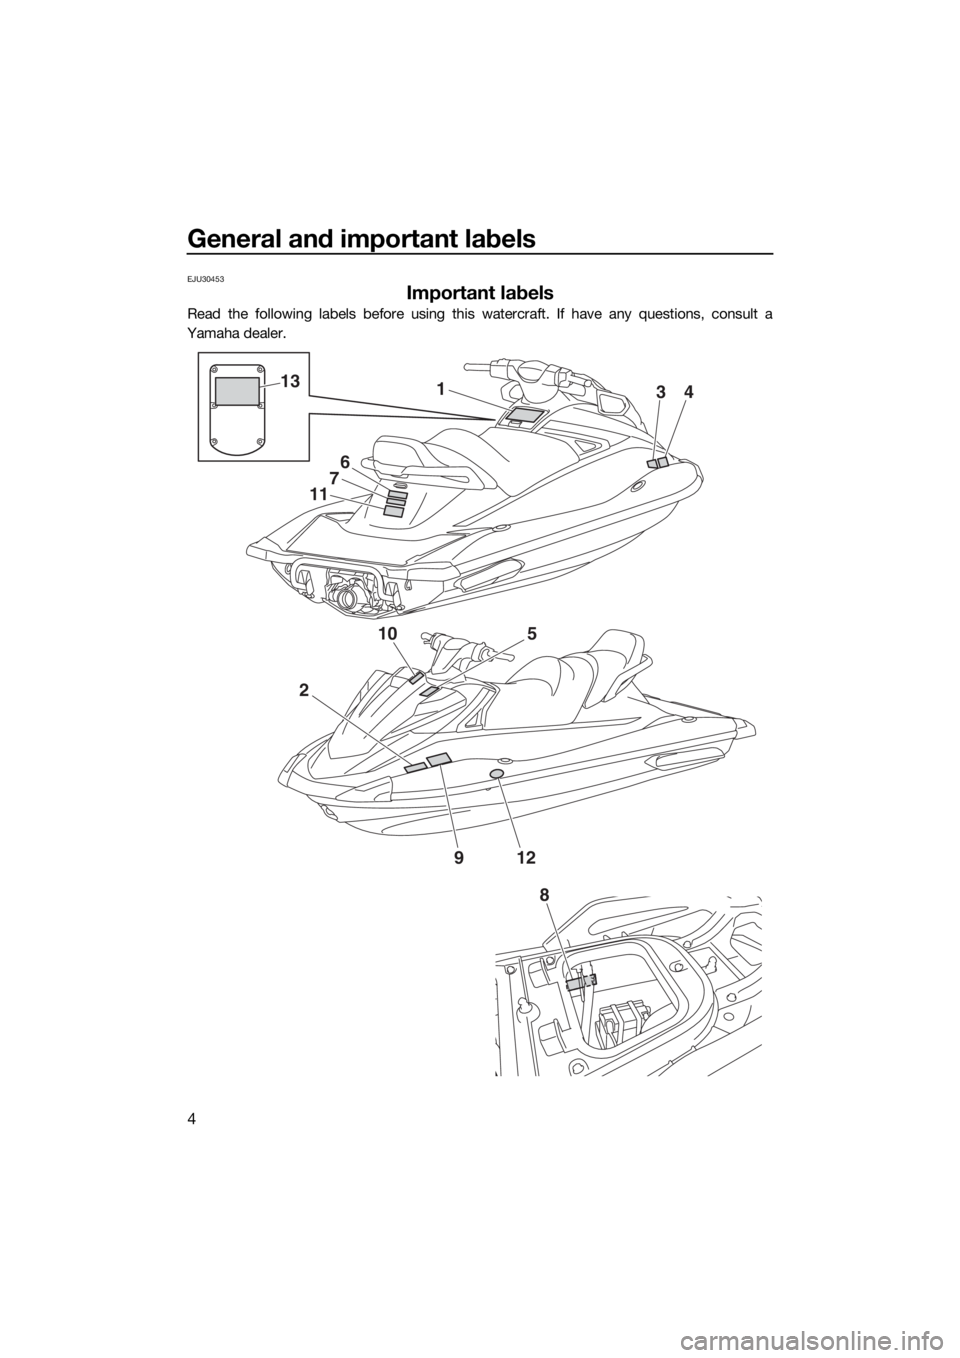 YAMAHA VX LIMITED 2016  Owners Manual General and important labels
4
EJU30453
Important labels
Read the following labels before using this watercraft. If have any questions, consult a
Yamaha dealer.
2
10
1
6
7
11
34
5
912
13
8
UF4G70E0.bo